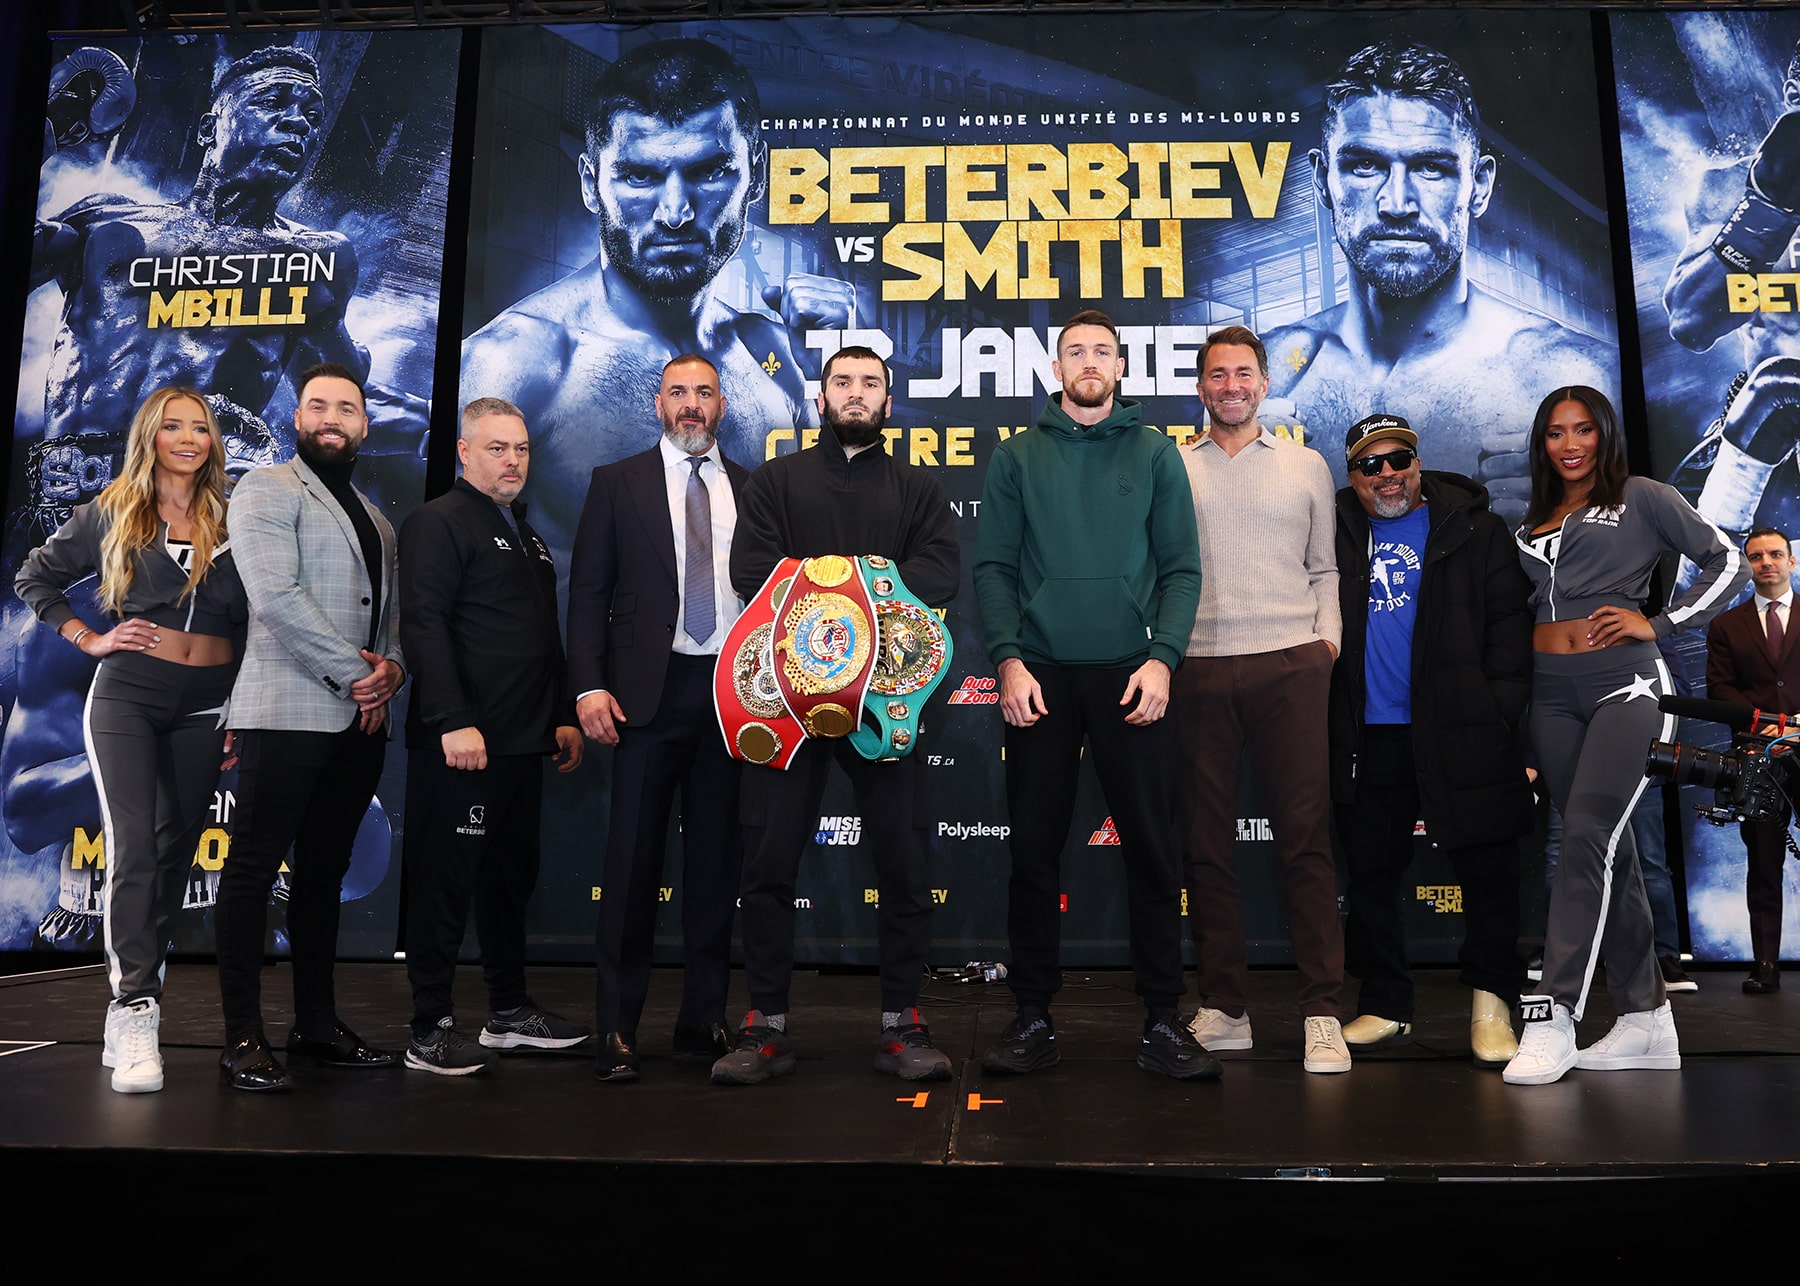 Paul Smith believes Canelo rematch is possible for brother Callum